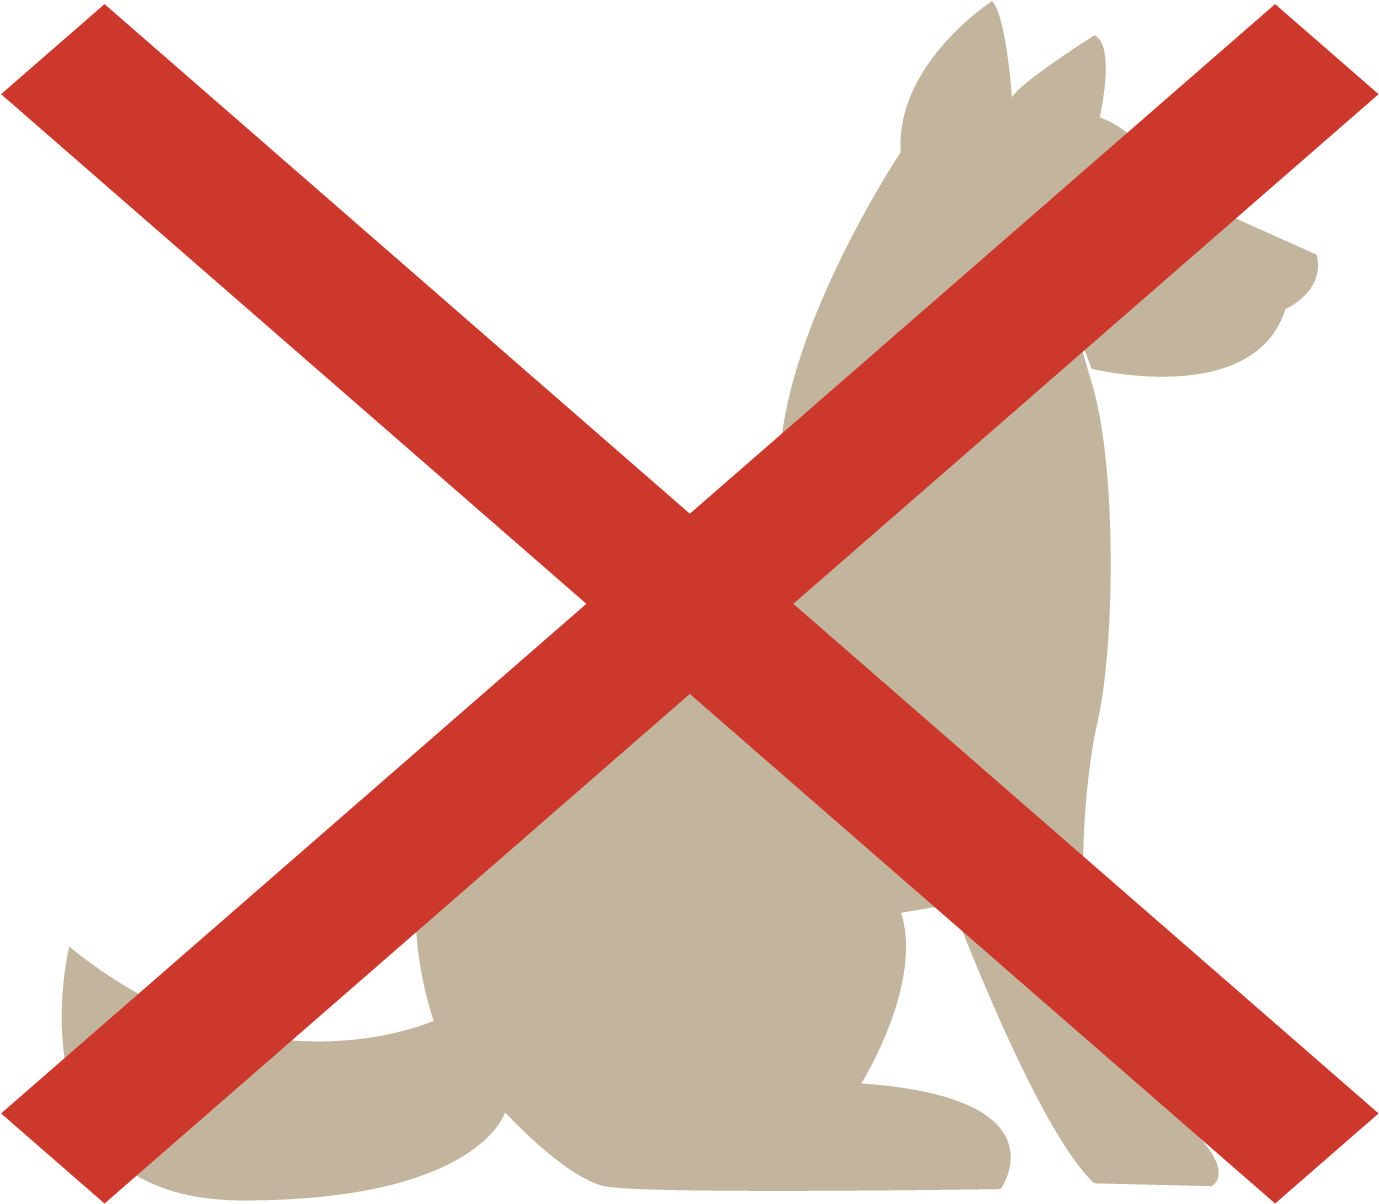 We Regret To Do Not Accept Our Friends Dogs And Cats - Graphic Design (1772x1772)